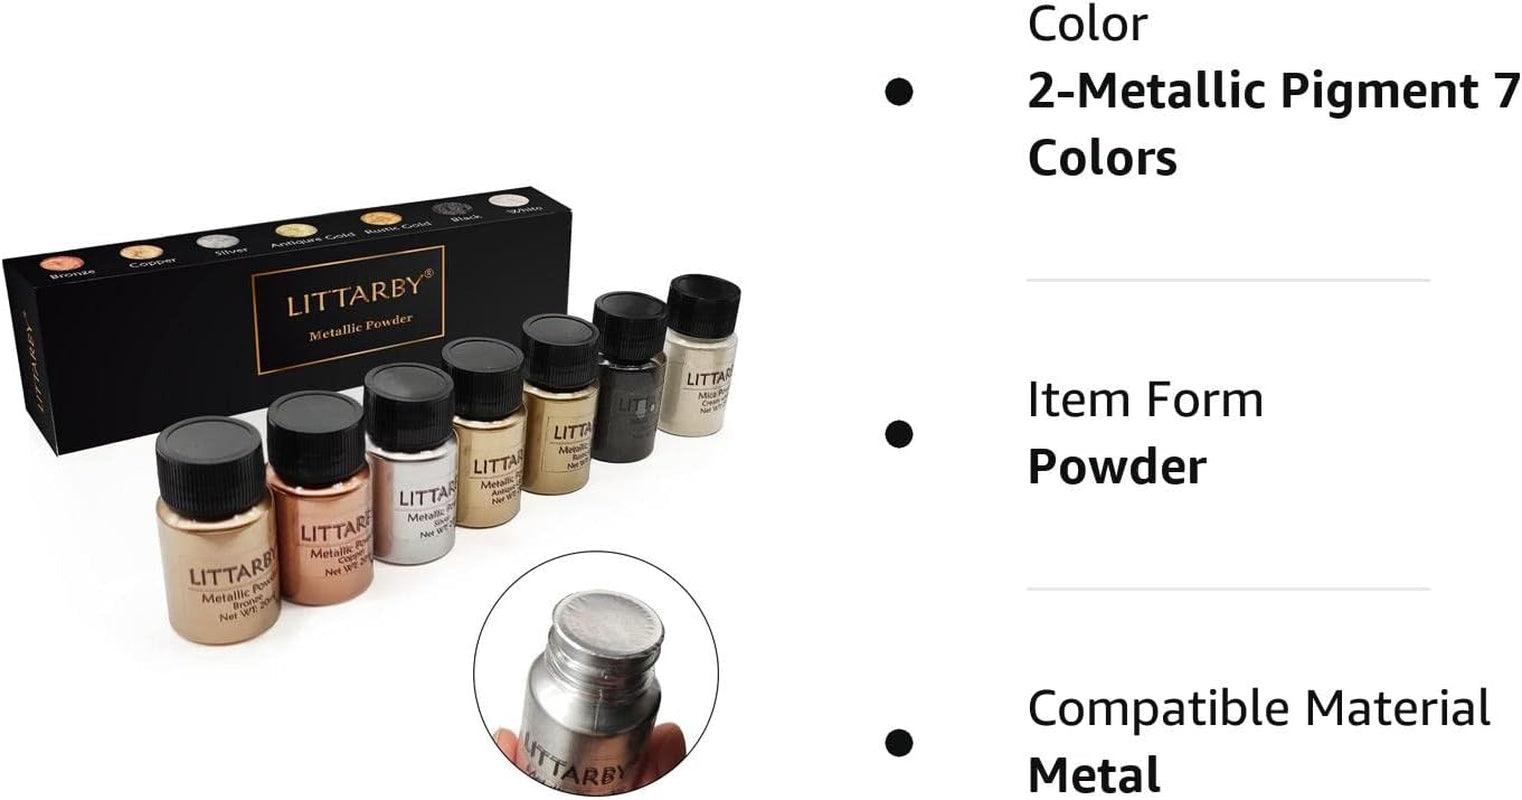 Metallic Pigment Powder for Epoxy Resin, Copper/Silver/Gold Metallic Powder and Black/Pearl White Mica Powder, Fine Real Mica Metal Dye for Kintsugi, Painting Arts, Polymer Clay, Tray, Countertops - WoodArtSupply